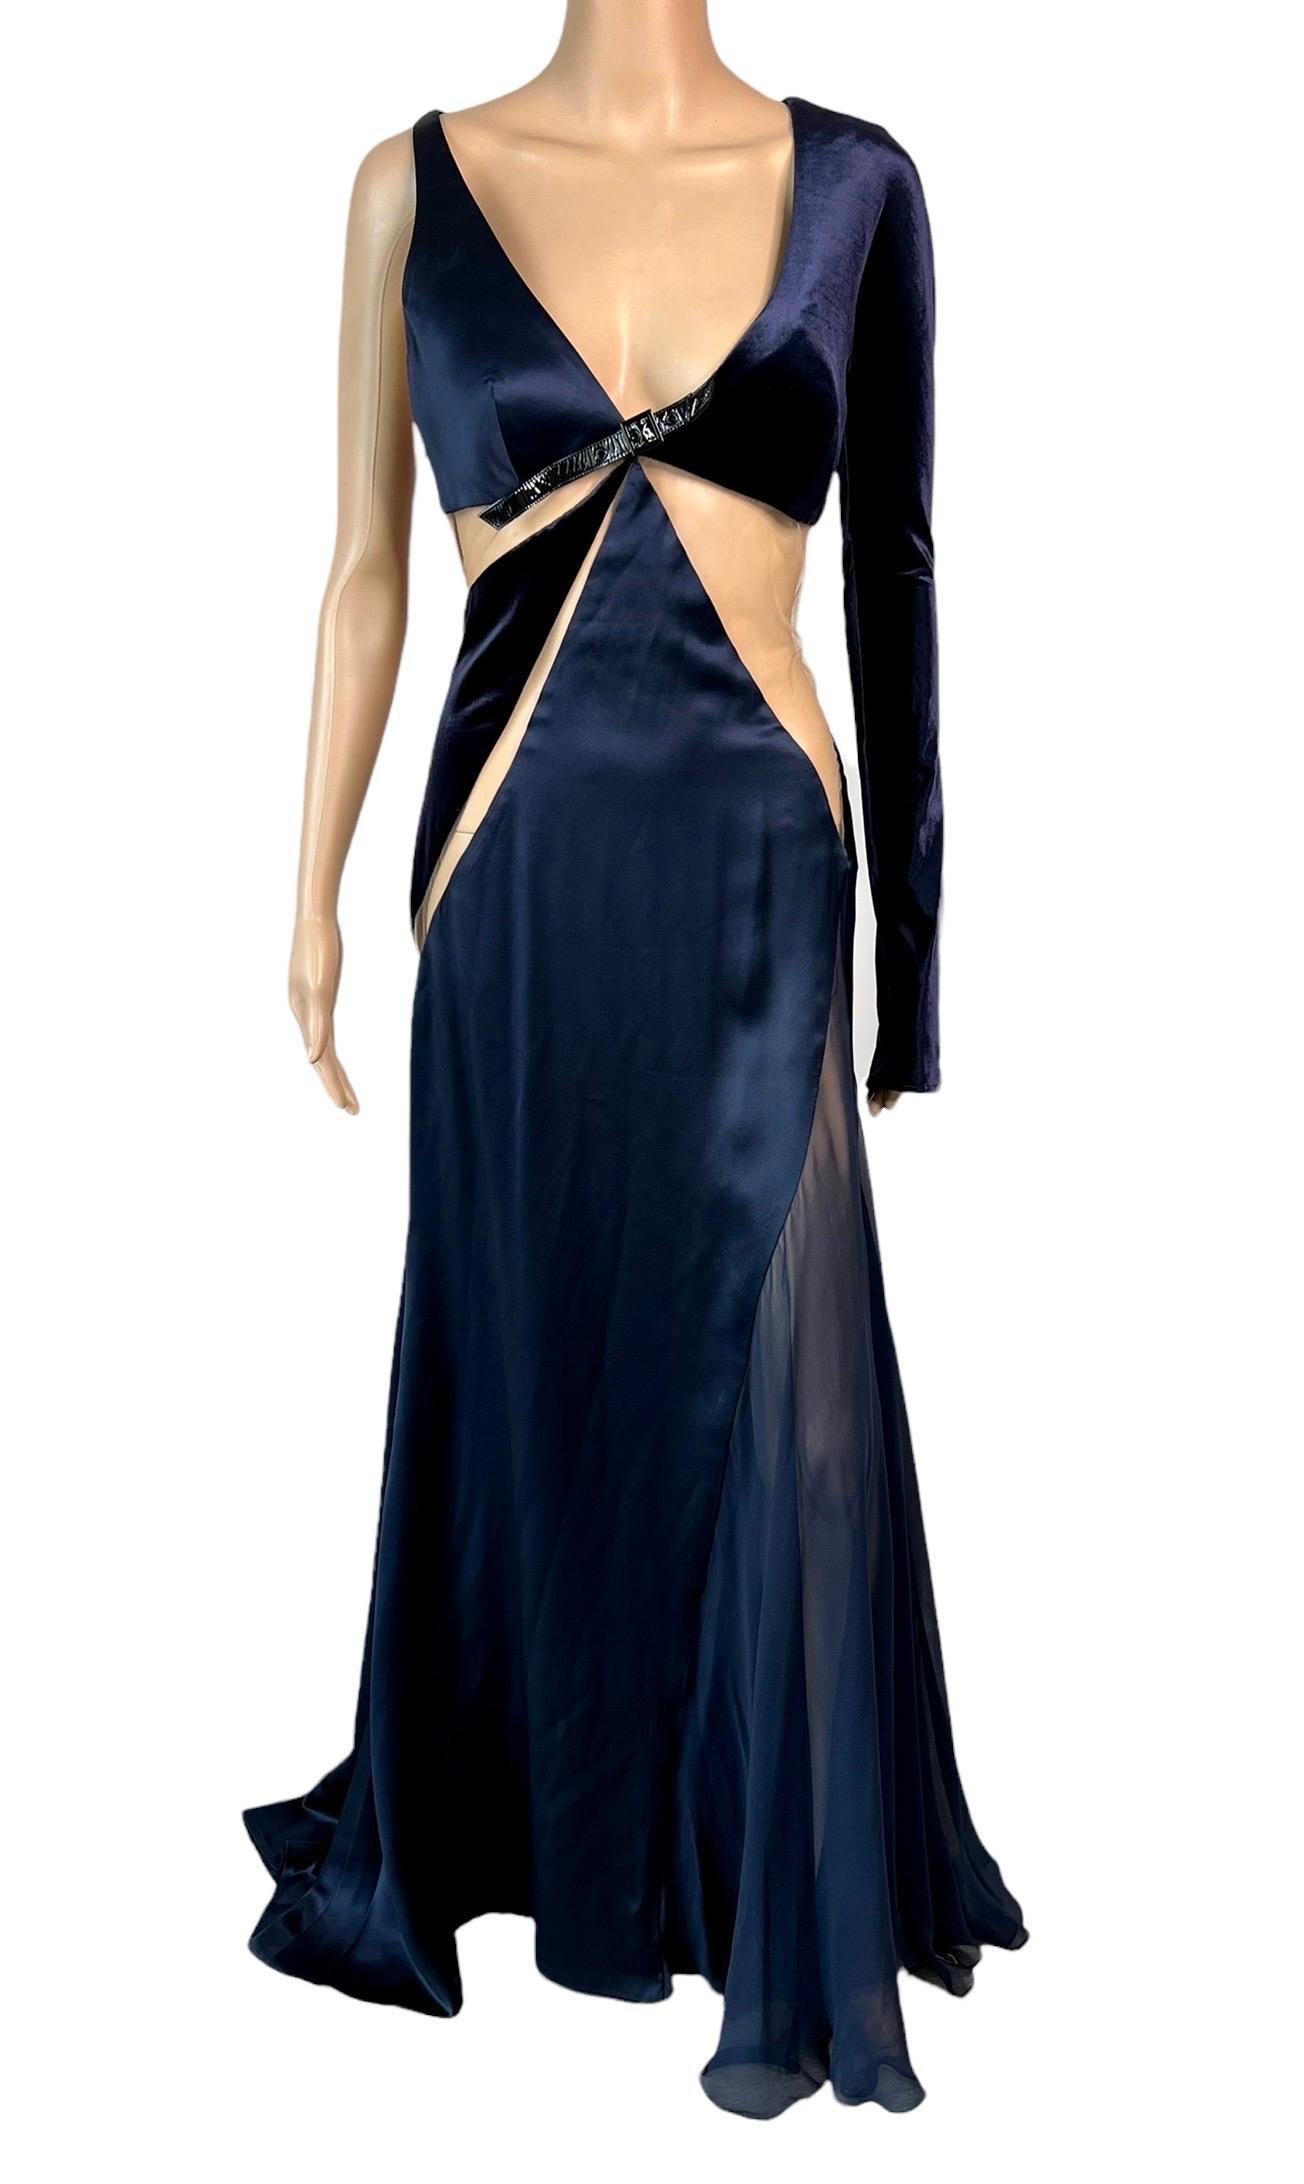 Versace F/W 2004 Runway Cutout Sheer Panels Buckle Detail Evening Dress Gown IT 44

Look 54 from the Fall 2004 Collection.




